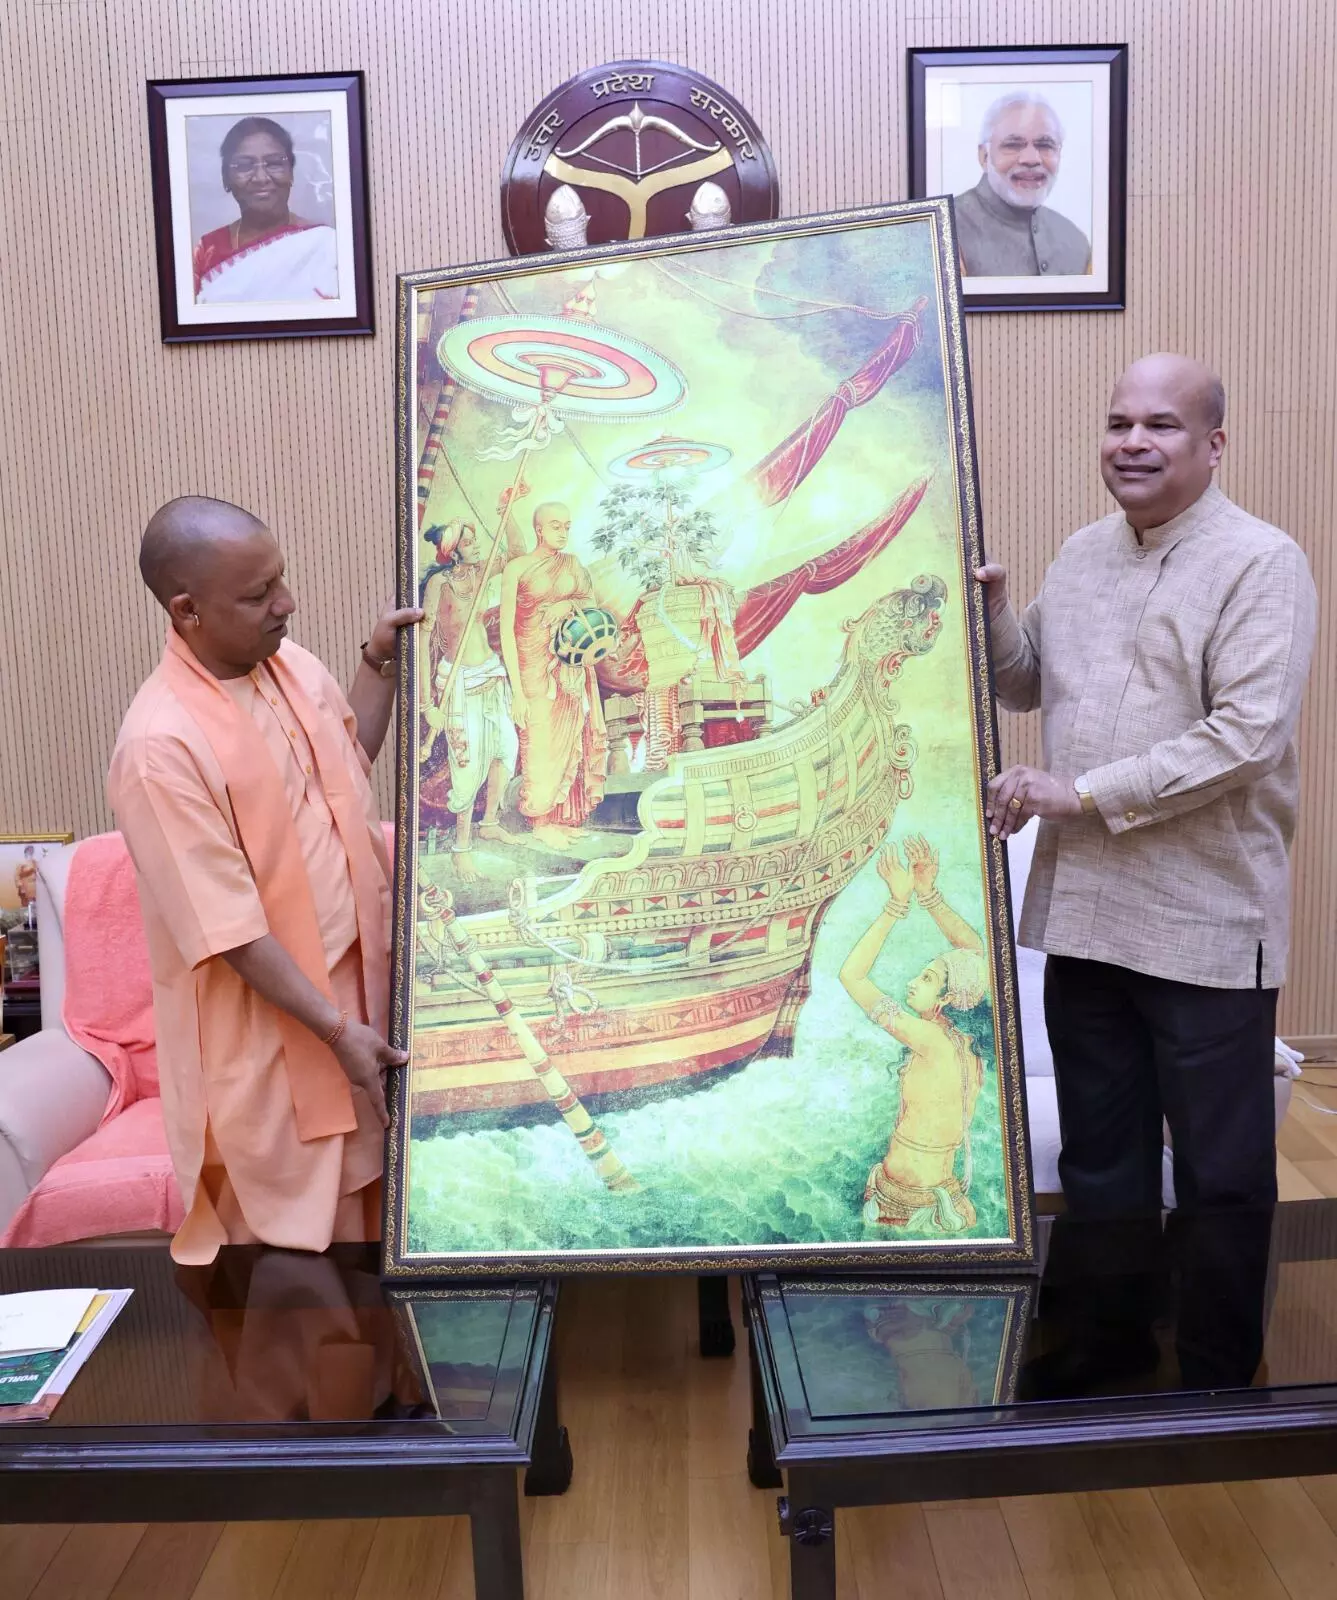 Varanasi Airport to Get a New Cultural Touch with Sri Lankan Paintings